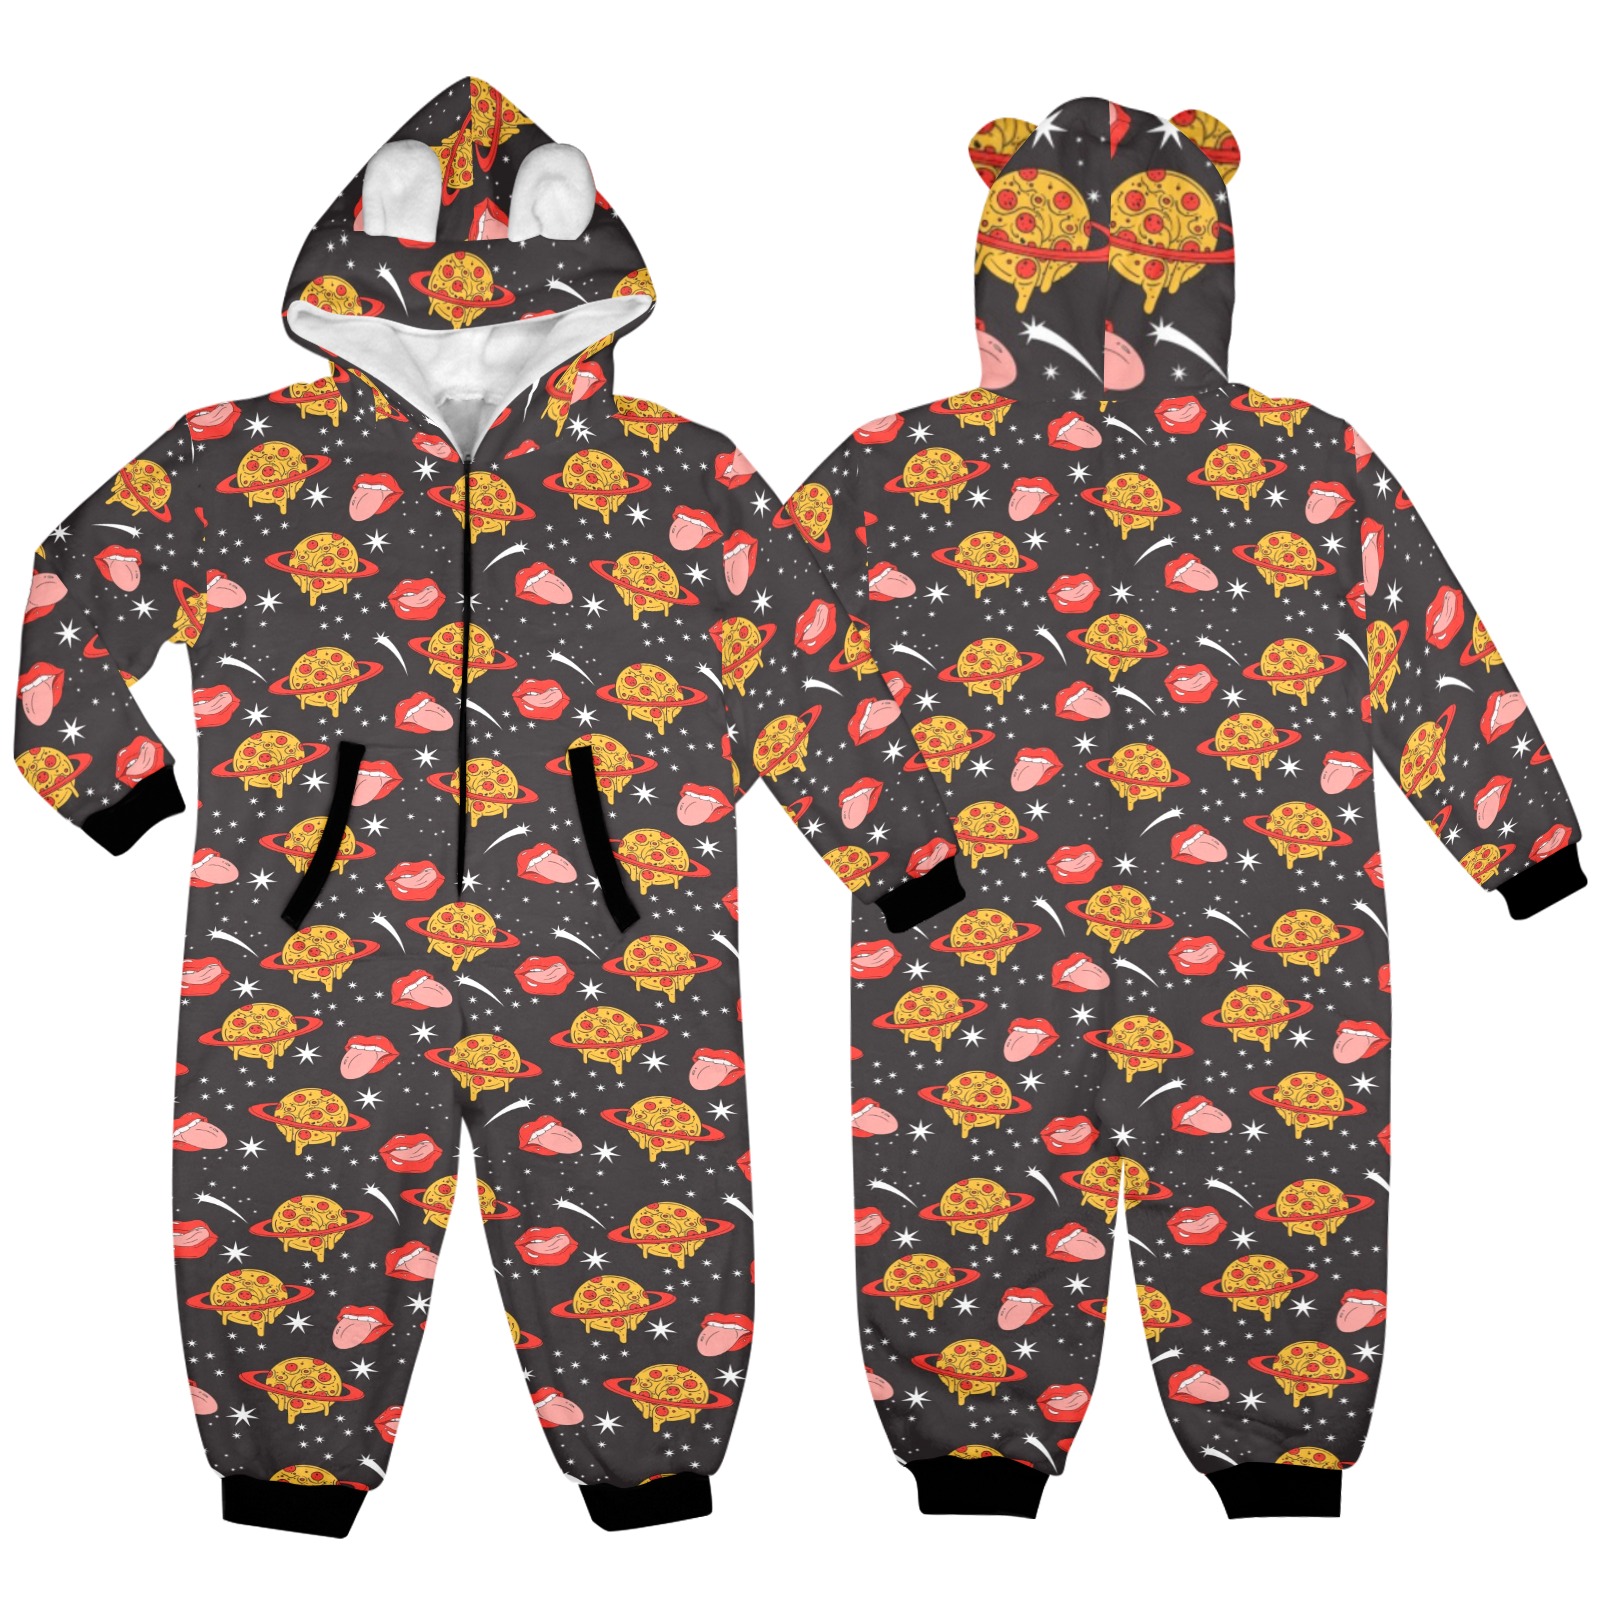 I like pizza space One-Piece Zip up Hooded Pajamas for Little Kids